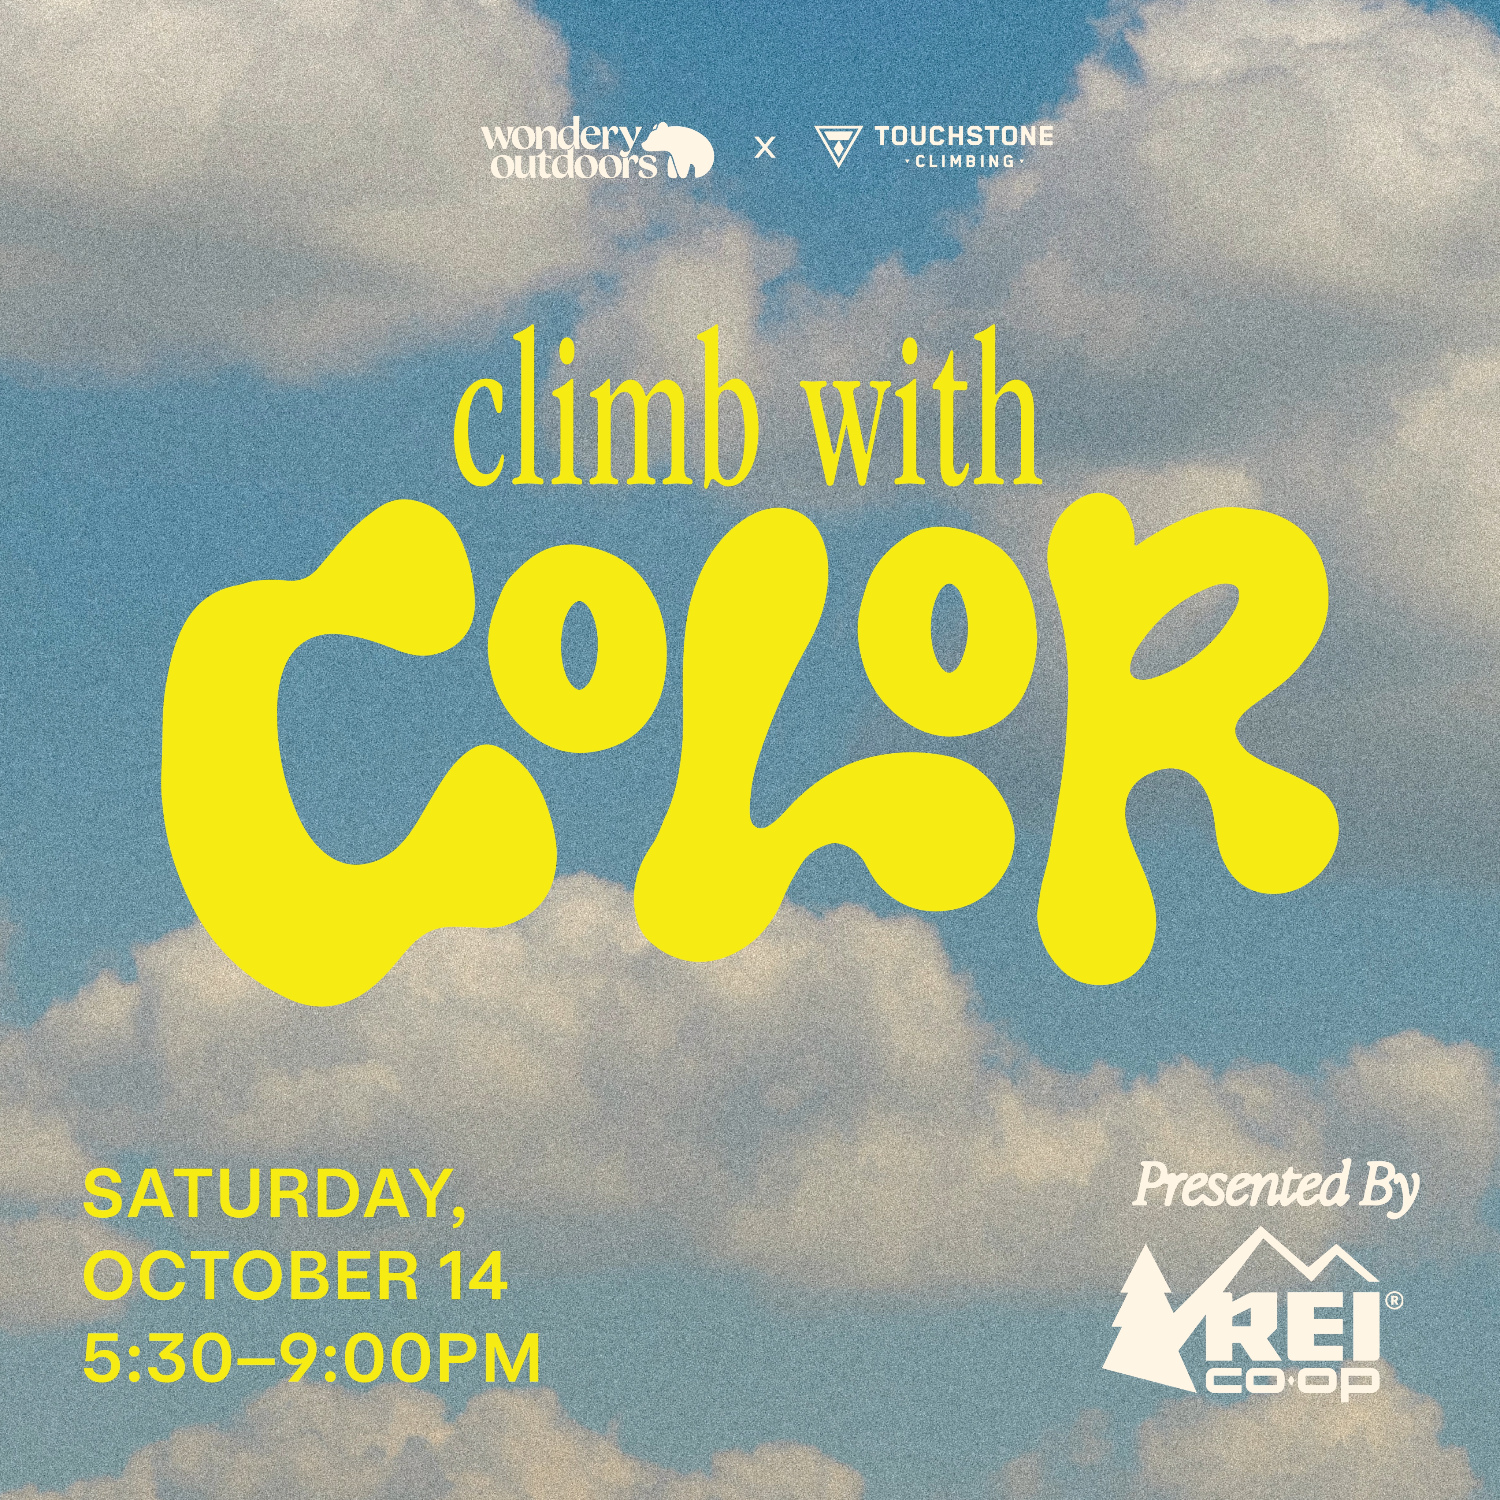 Wondery Outdoors Hosts Climb with Color